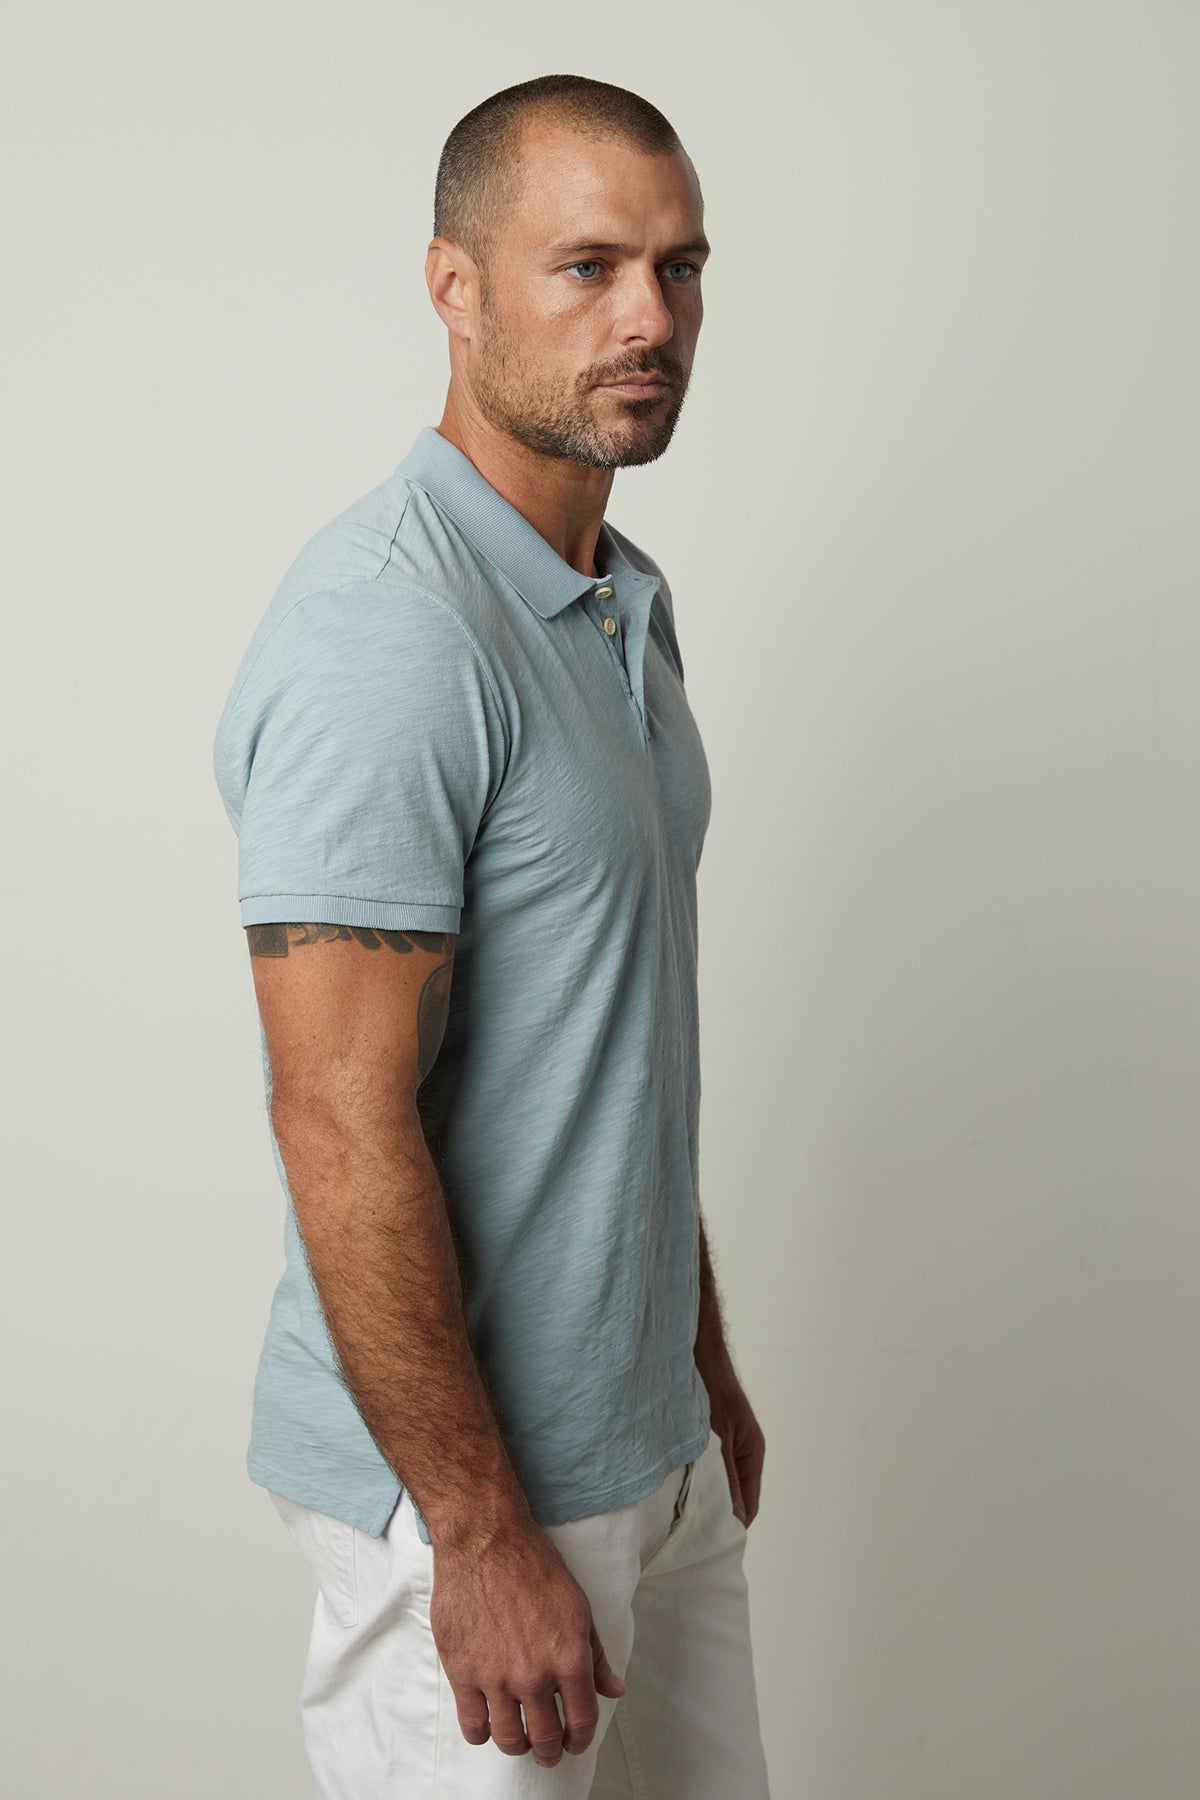 Niko Polo in Ojai Short Sleeve Collared Shirt with white pants close up side view of sleeve and collar-35783018021057